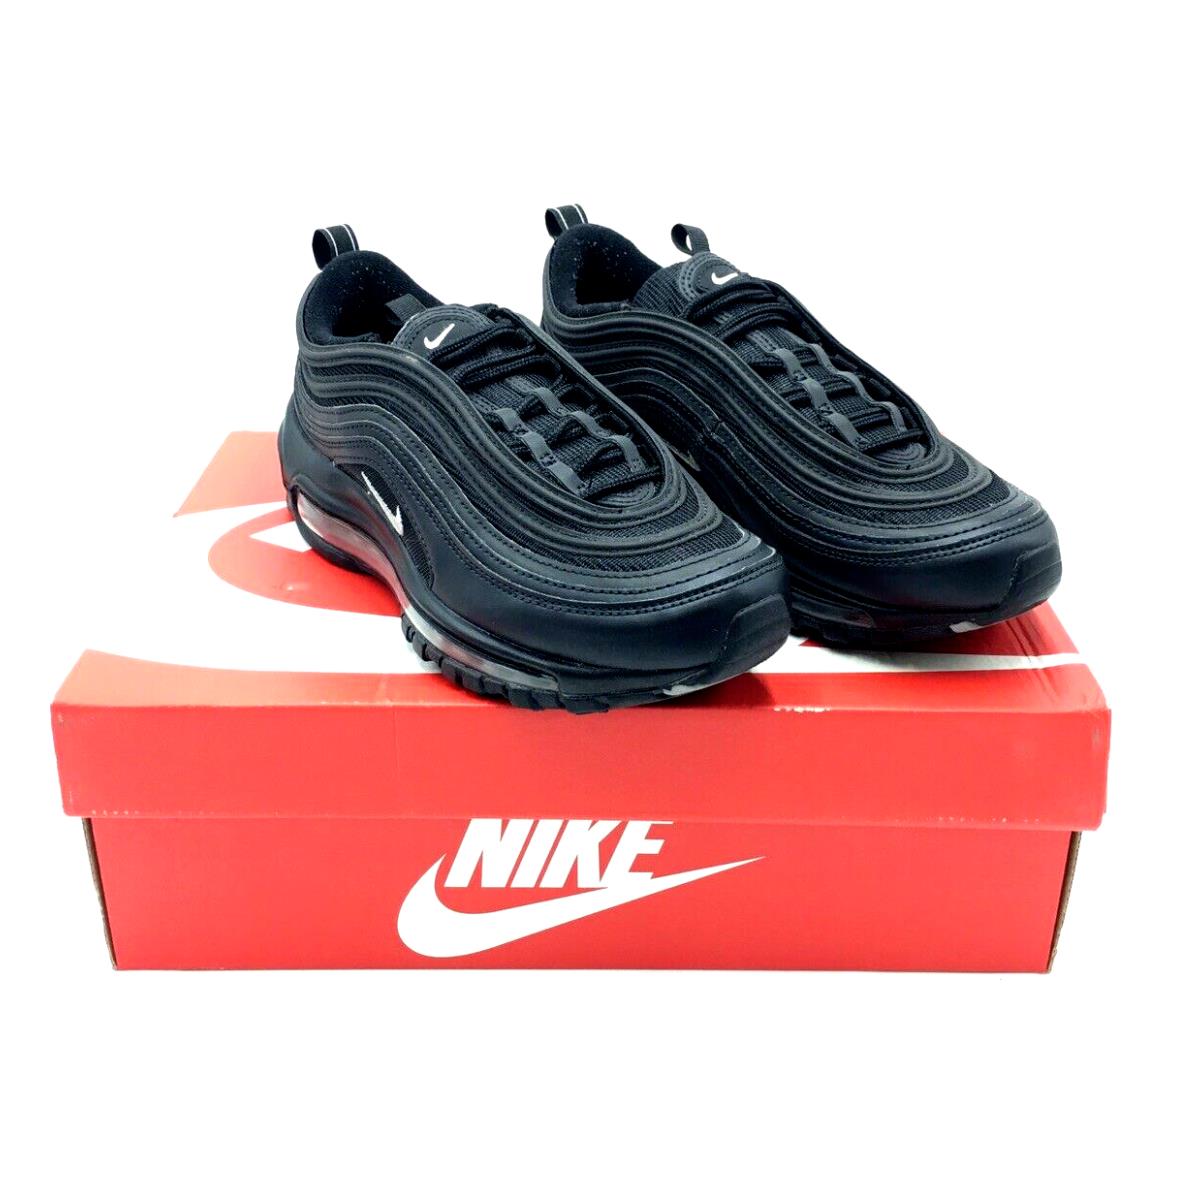 Nike Women`s Air Max 97 Running Shoes Sneakers Size 7.5 Black - 921733001